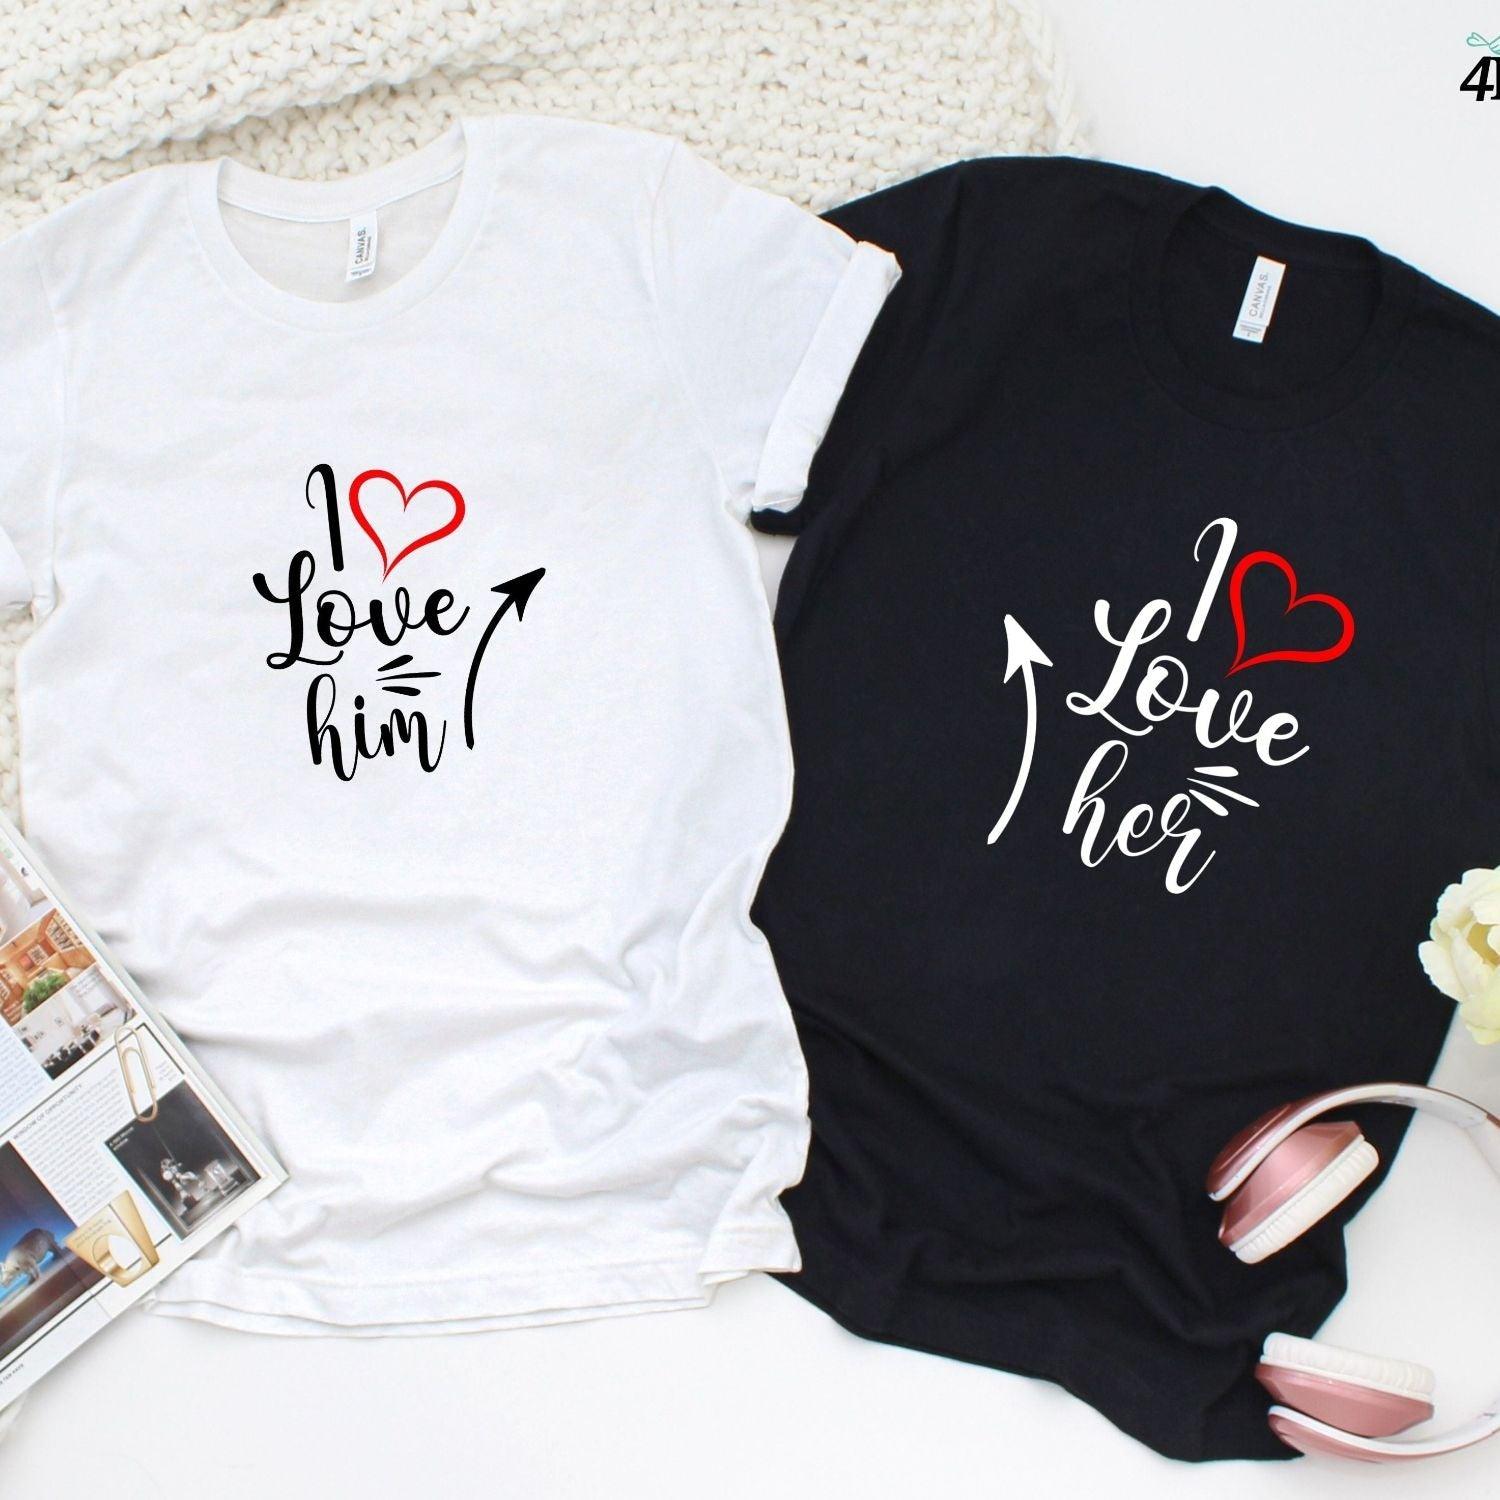 Cute Couples' Matching Outfits: Adorable I Love Him/Her Valentine Set, Ideal Gift - 4Lovebirds